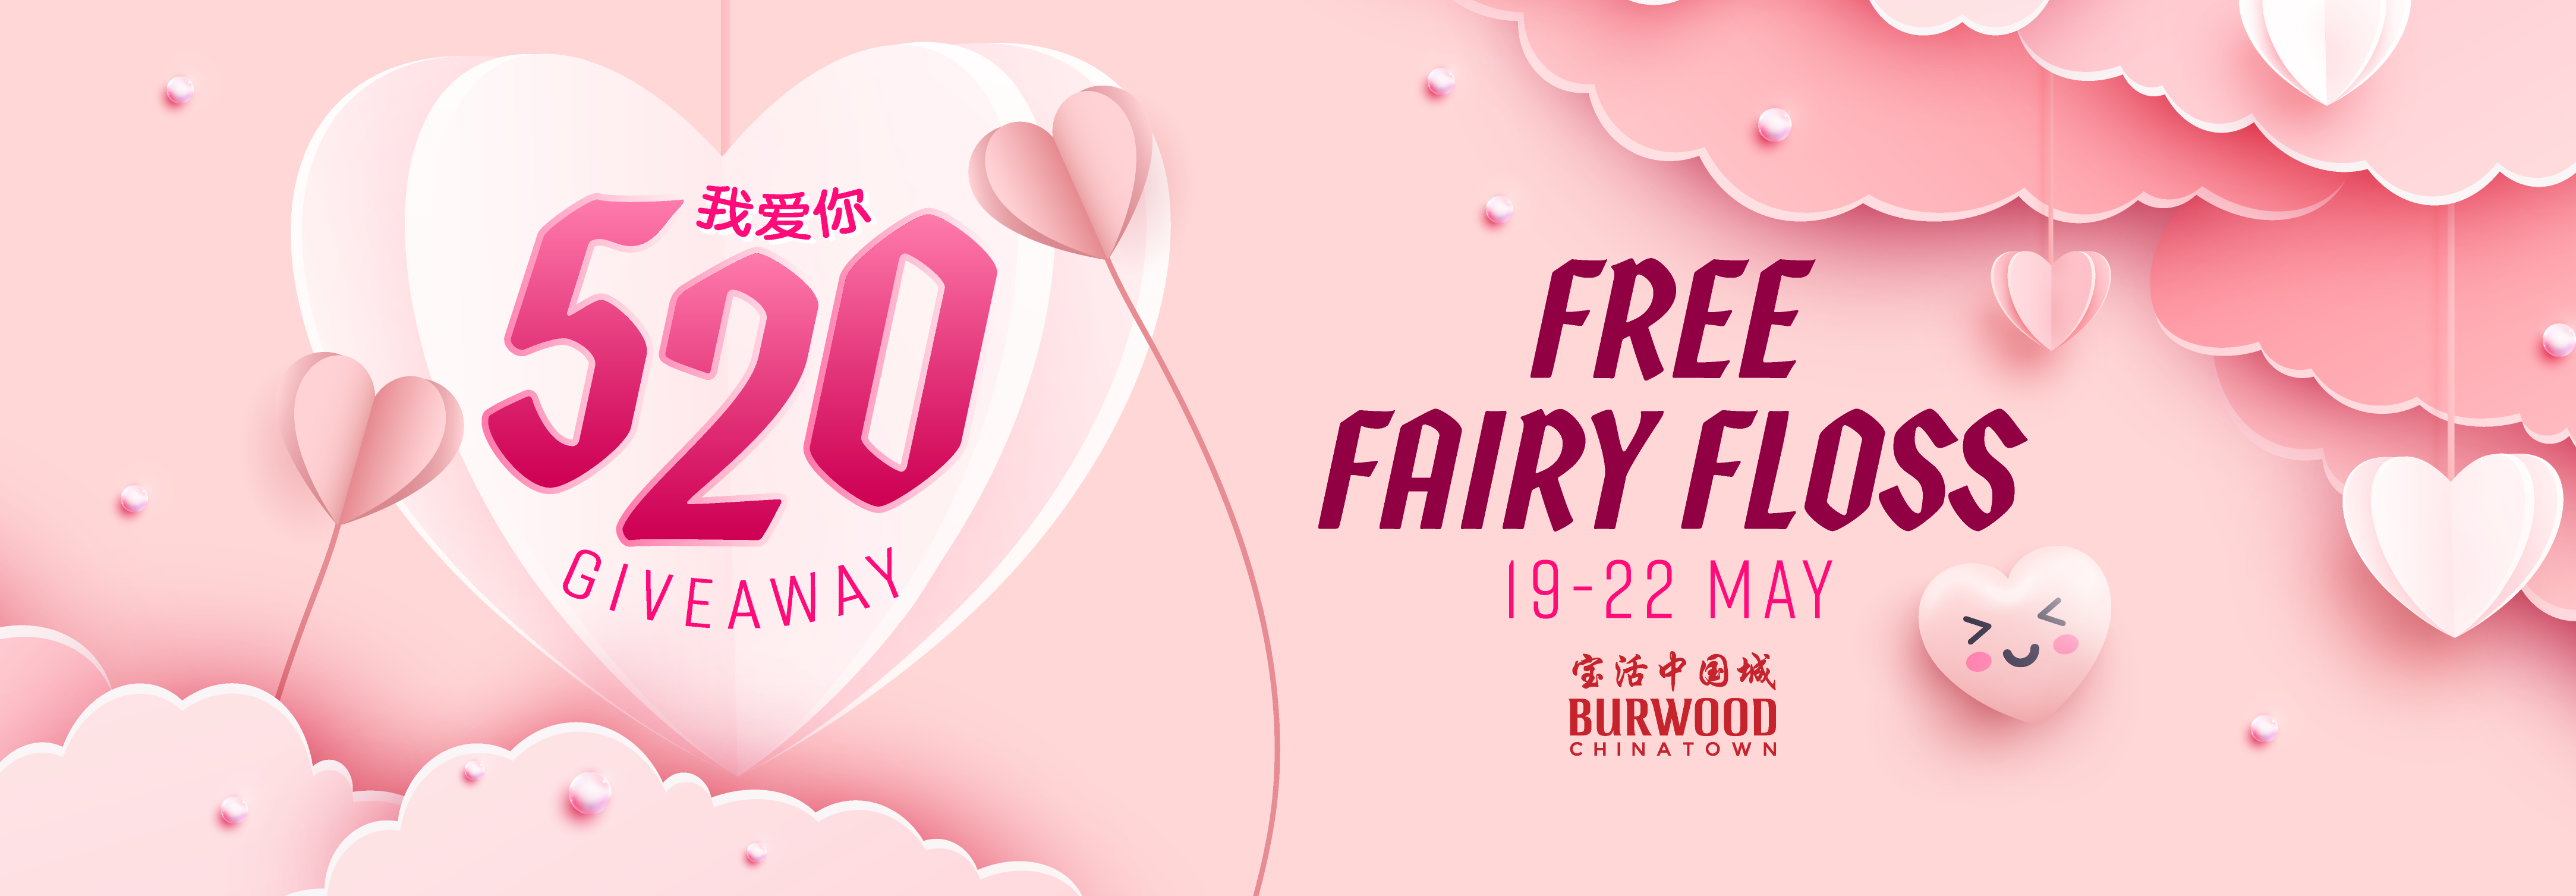 FREE Fairy Floss – 520 Valentine’s Day Giveaway